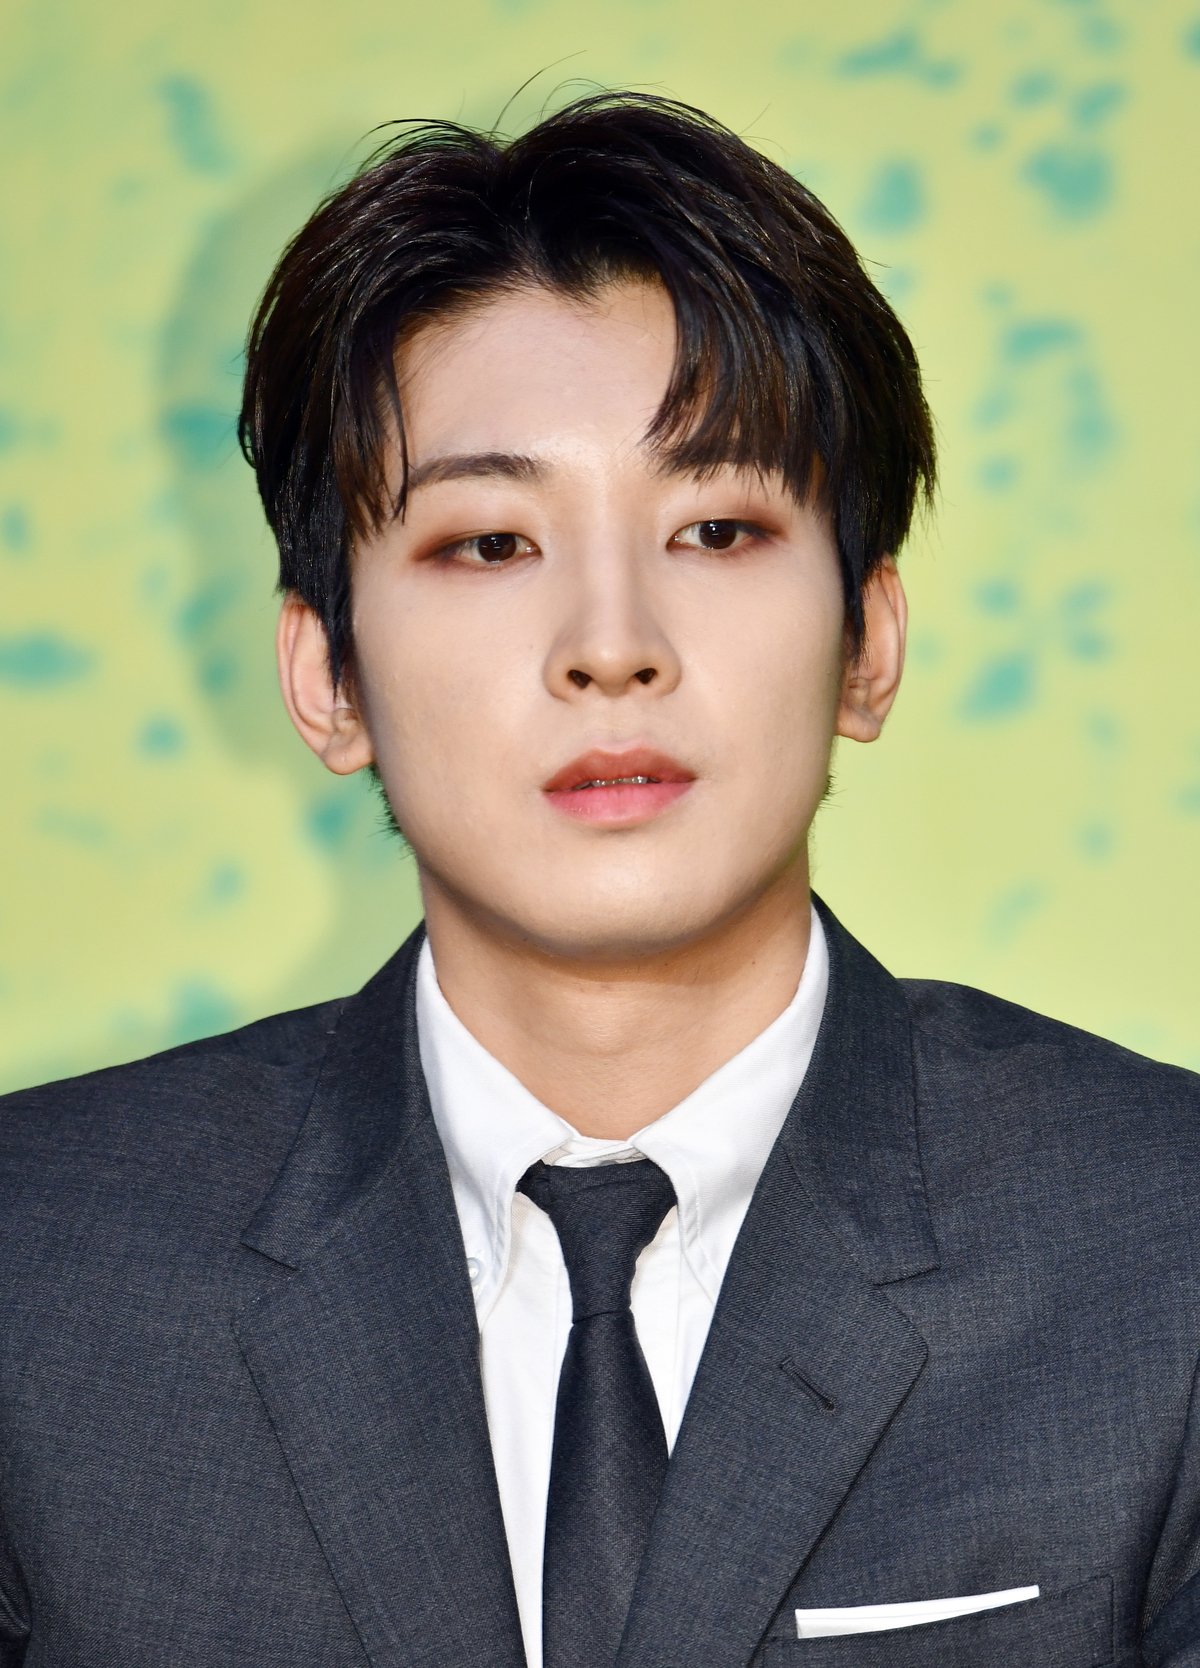 Dressed in a dark suit, Wonwoo of SEVENTEEN attends SEVENTEEN's 8th Mini Album 'Your Choice' Release Press Conference at Intercontinental Seoul Coex Harmony Ballroom in Seoul, South Korea.